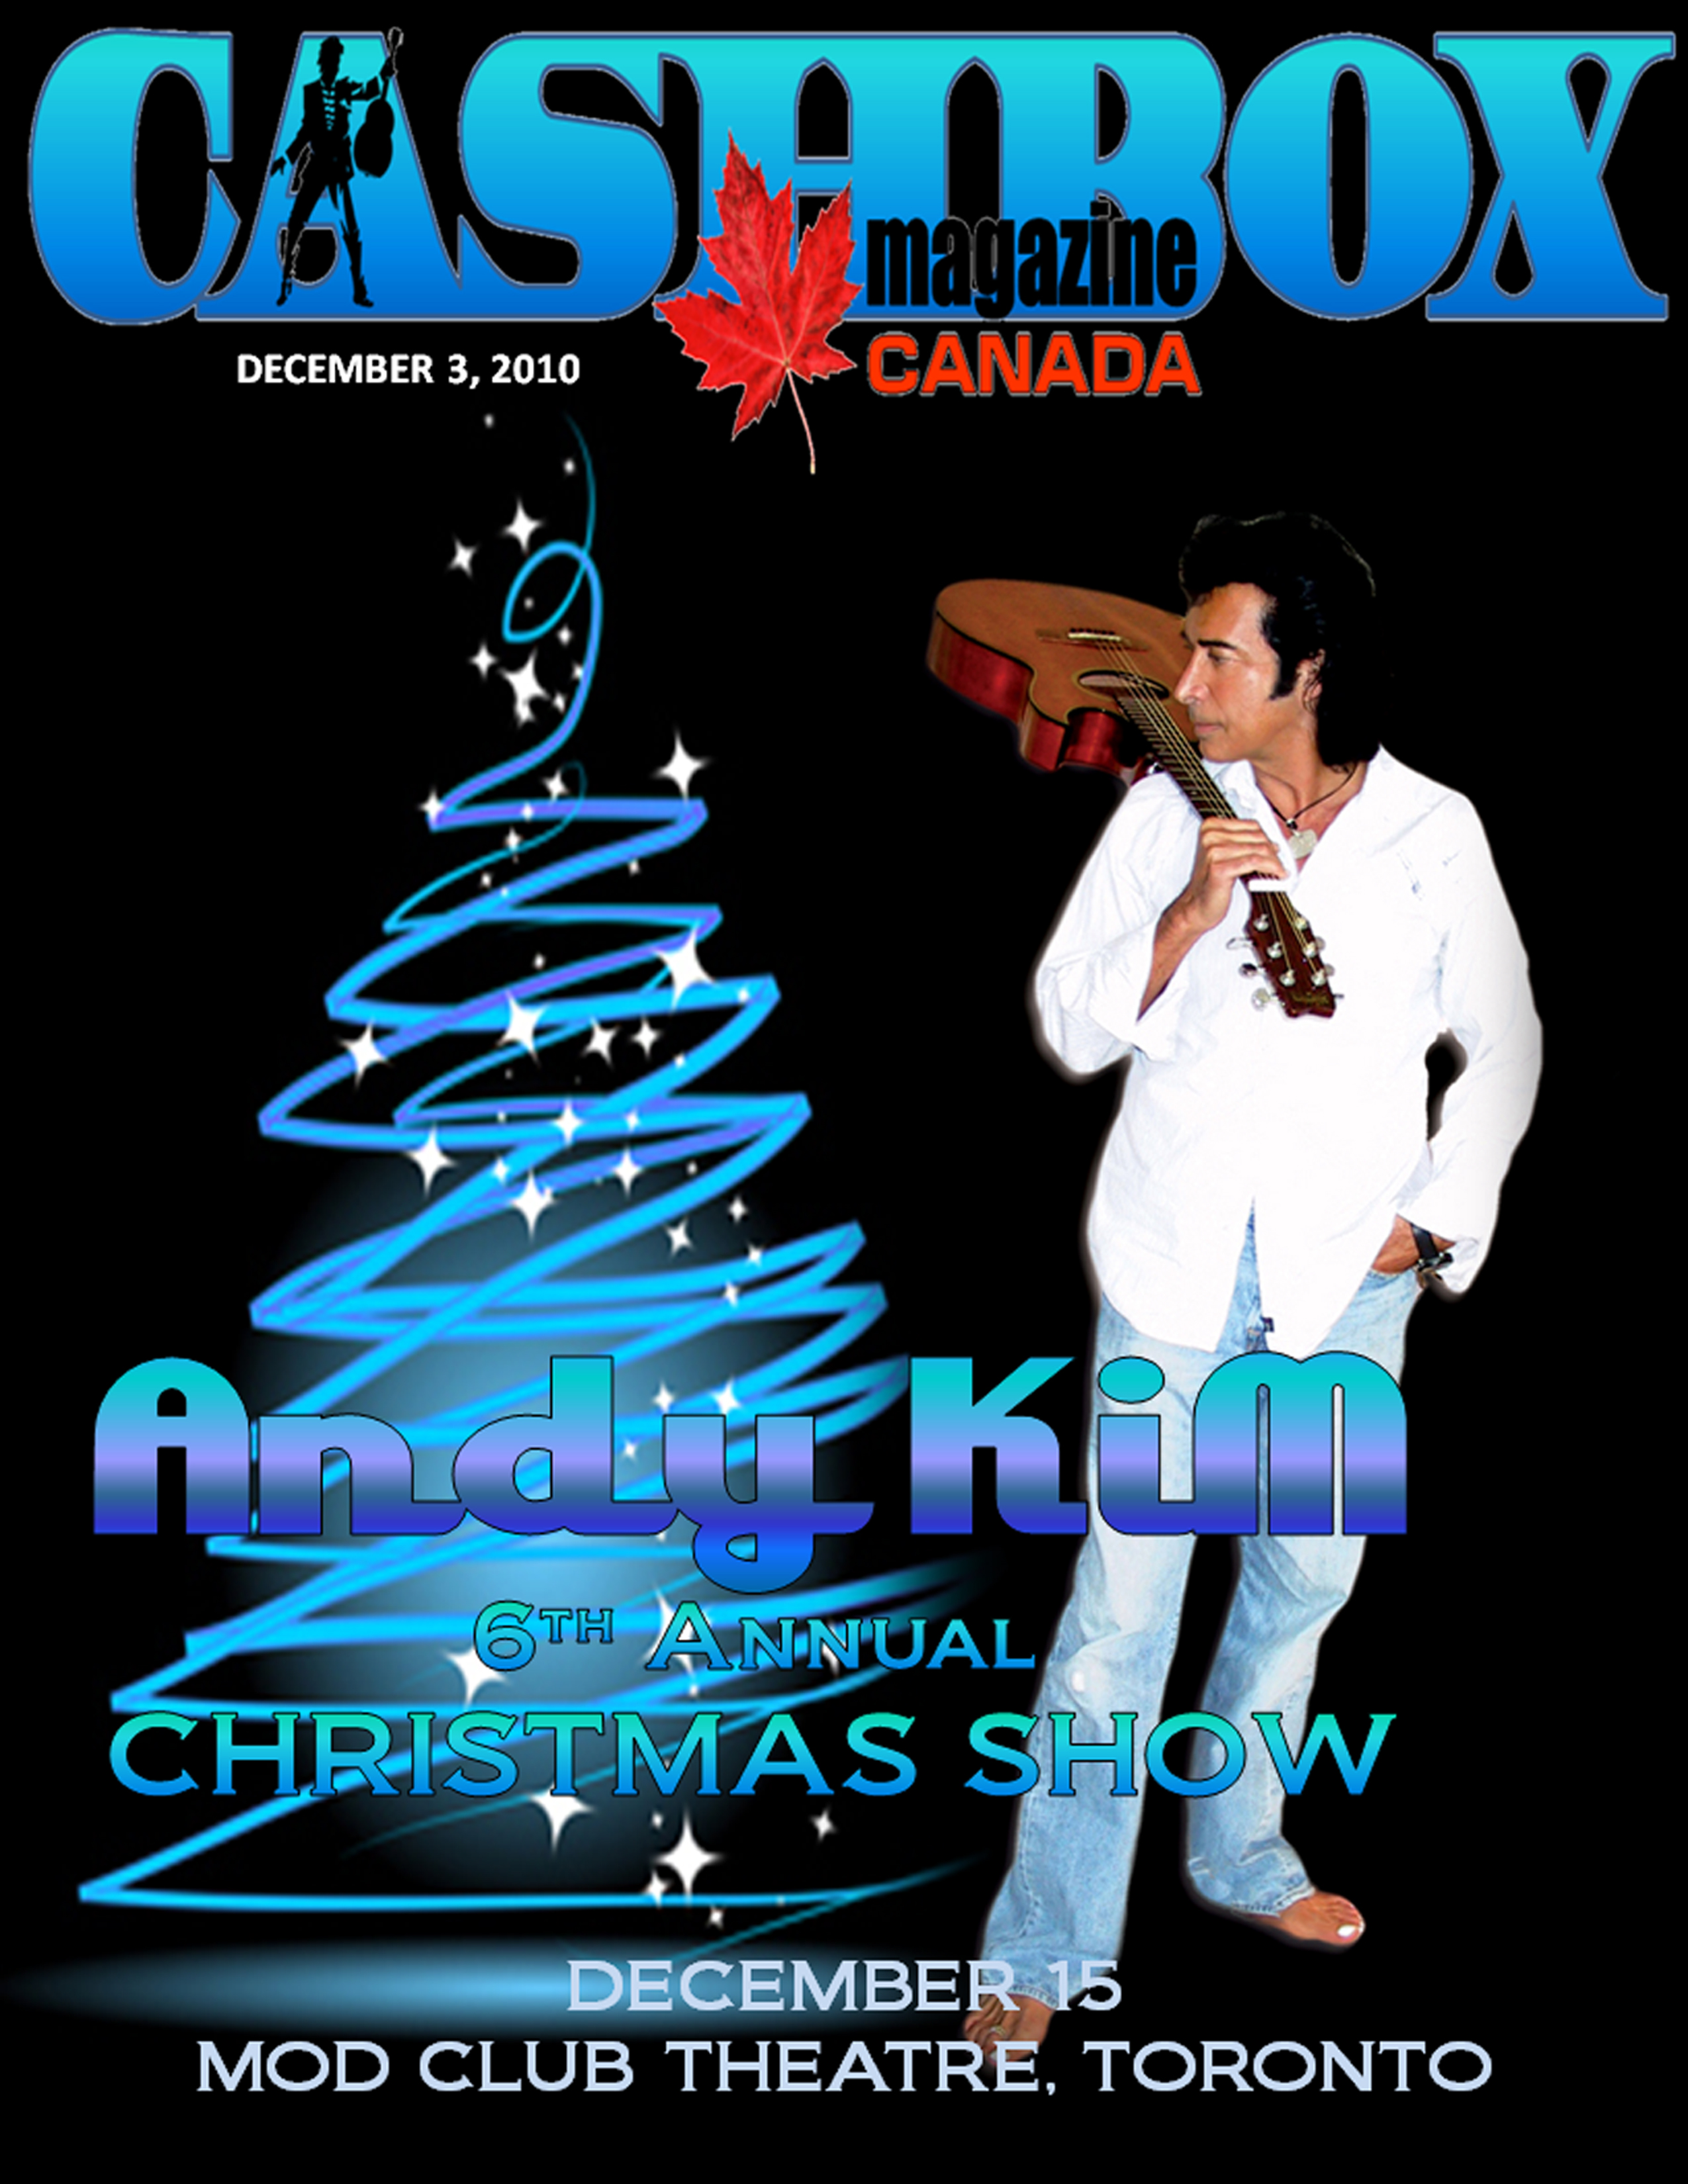 Andy Kim Celebrates Christmas with his 6th Annual Christmas Show